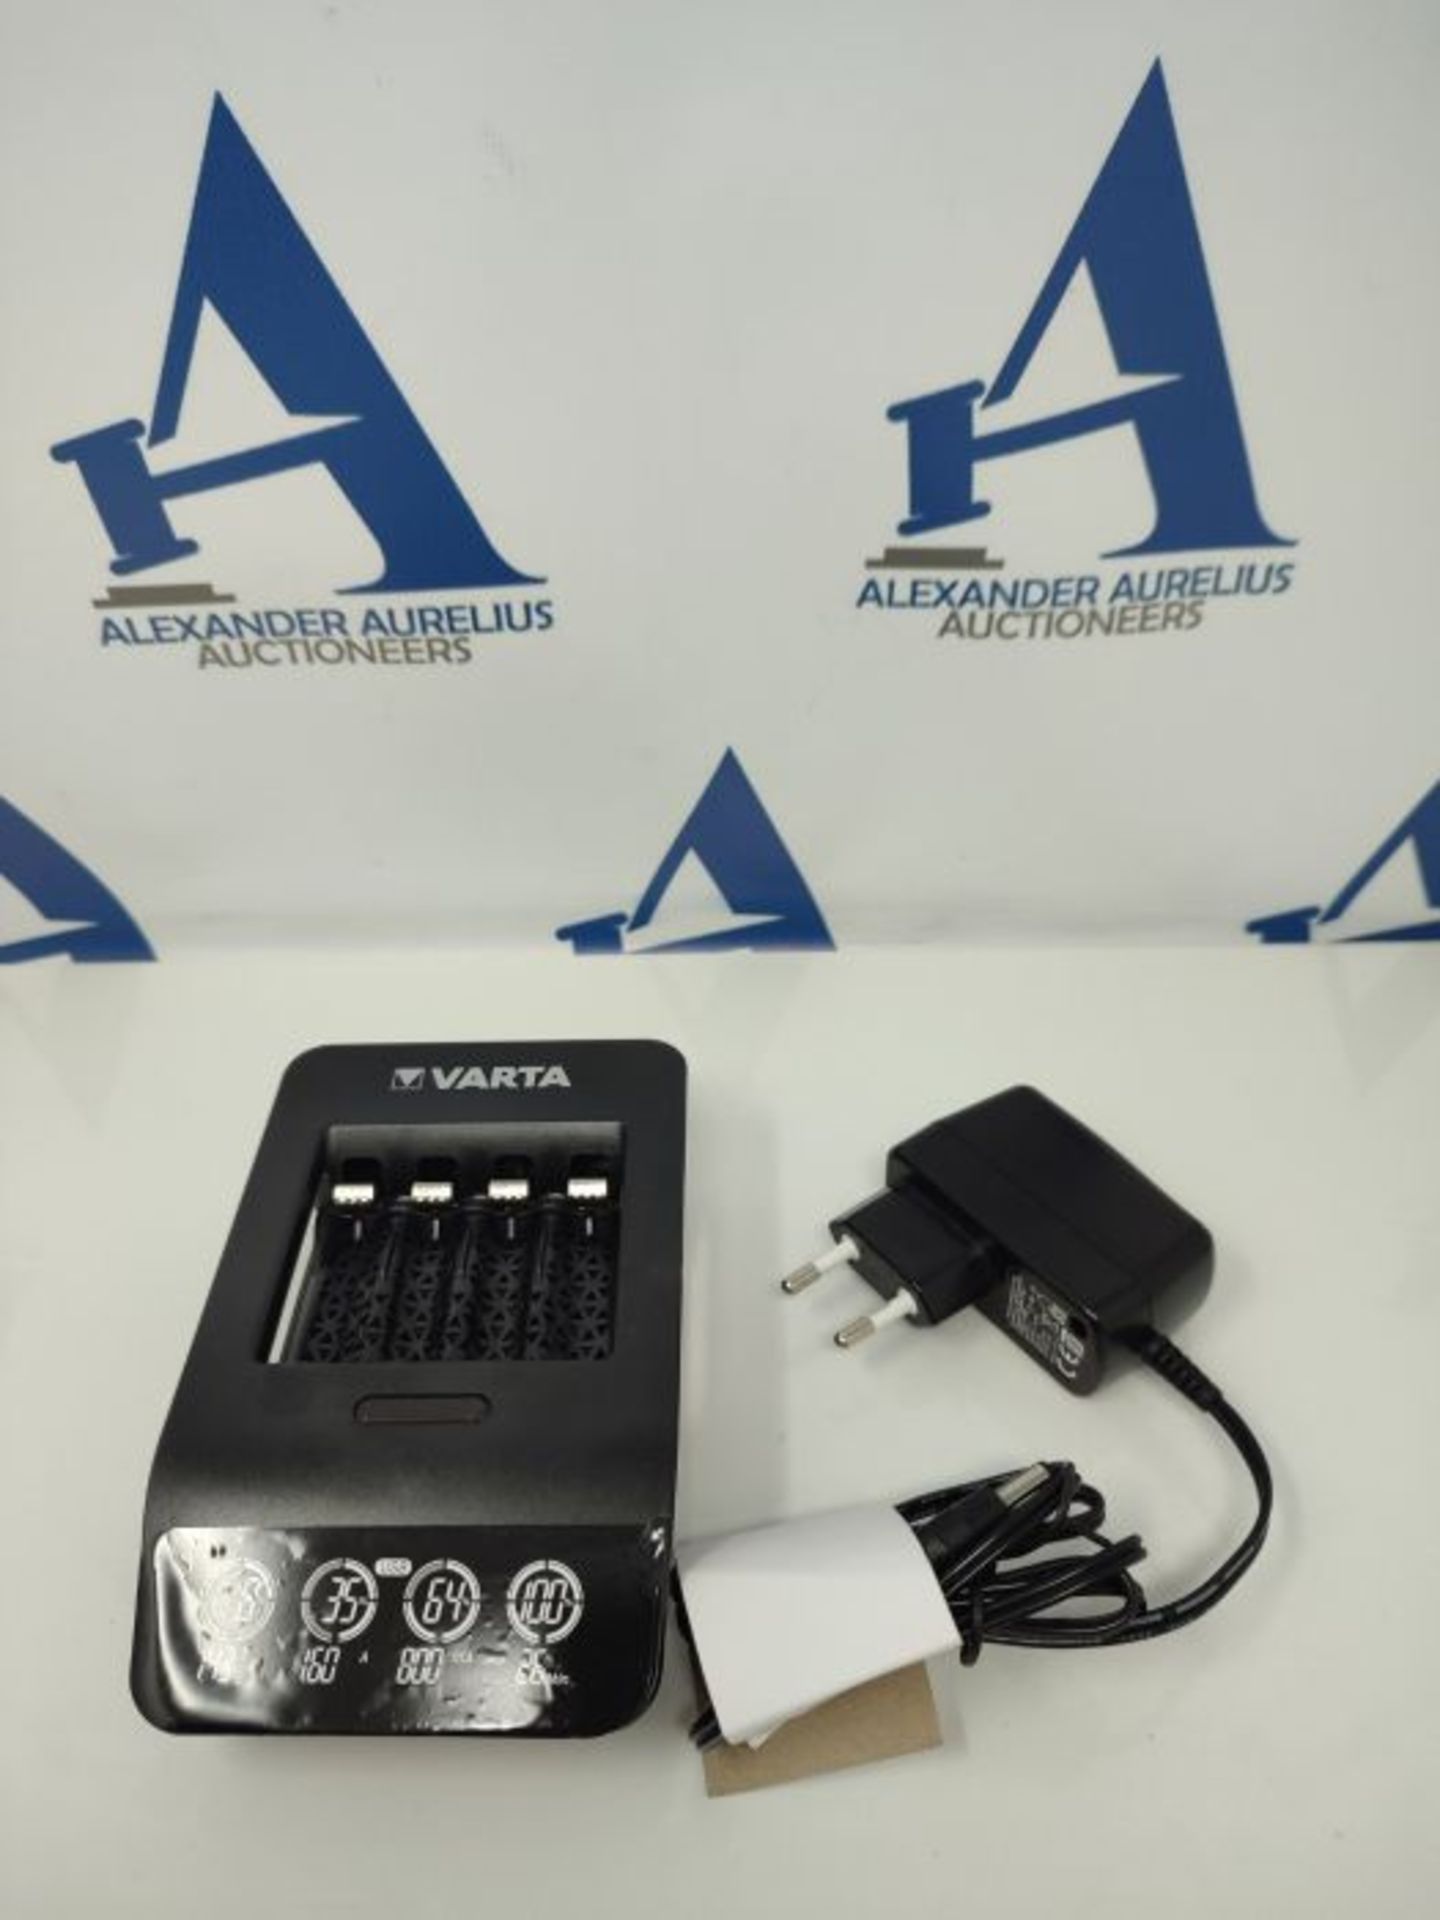 VARTA Smart Charger+ for AA/AAA, single bay charge, detection of defective cells, incl - Image 2 of 2